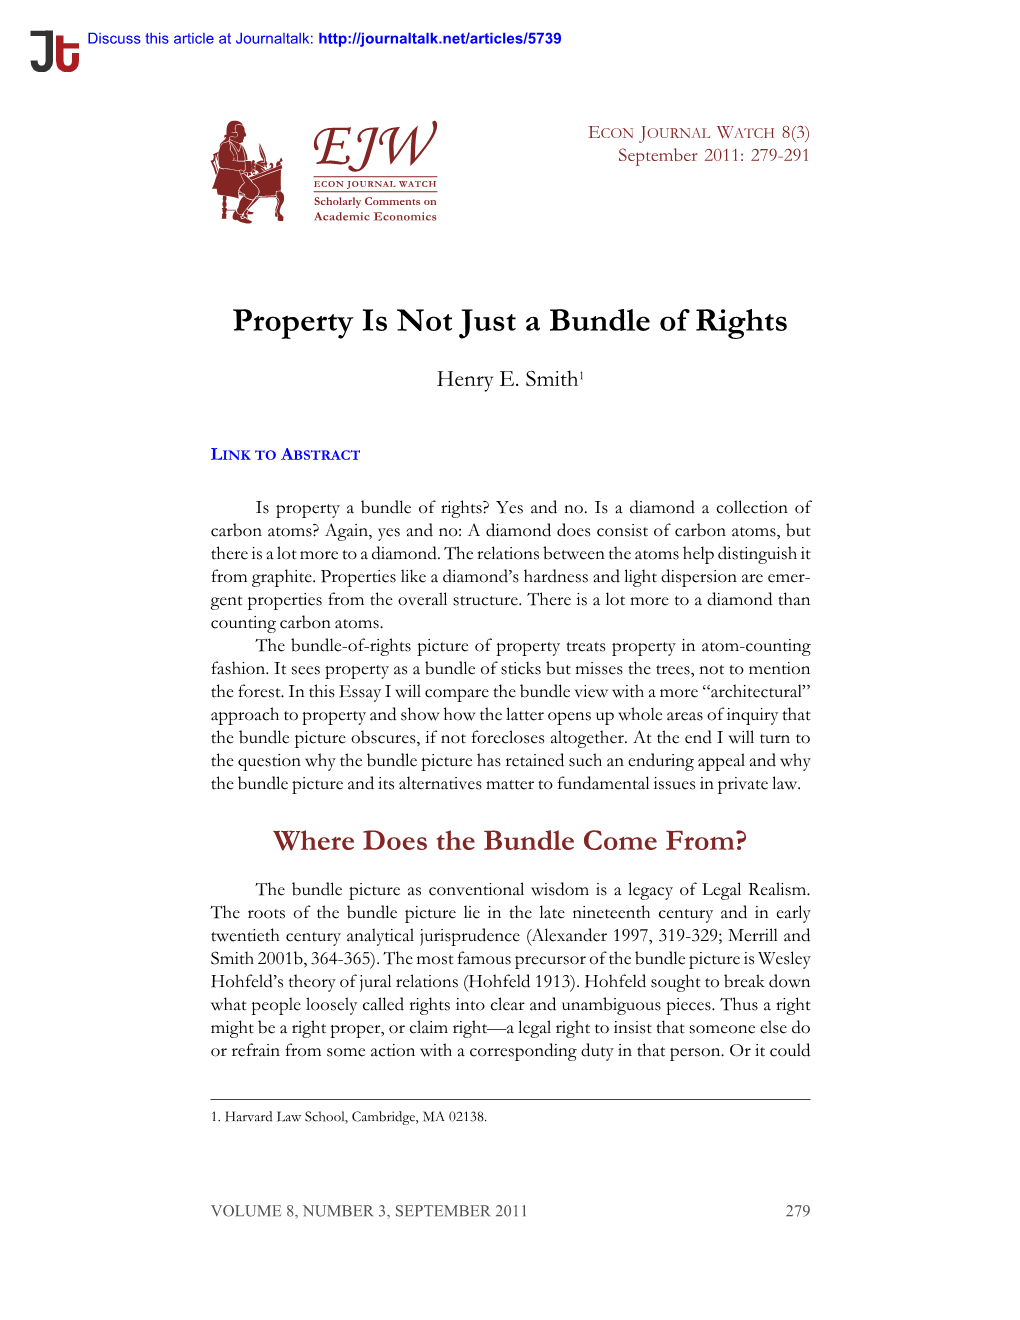 Property,Bundle of Rights,Exclusion